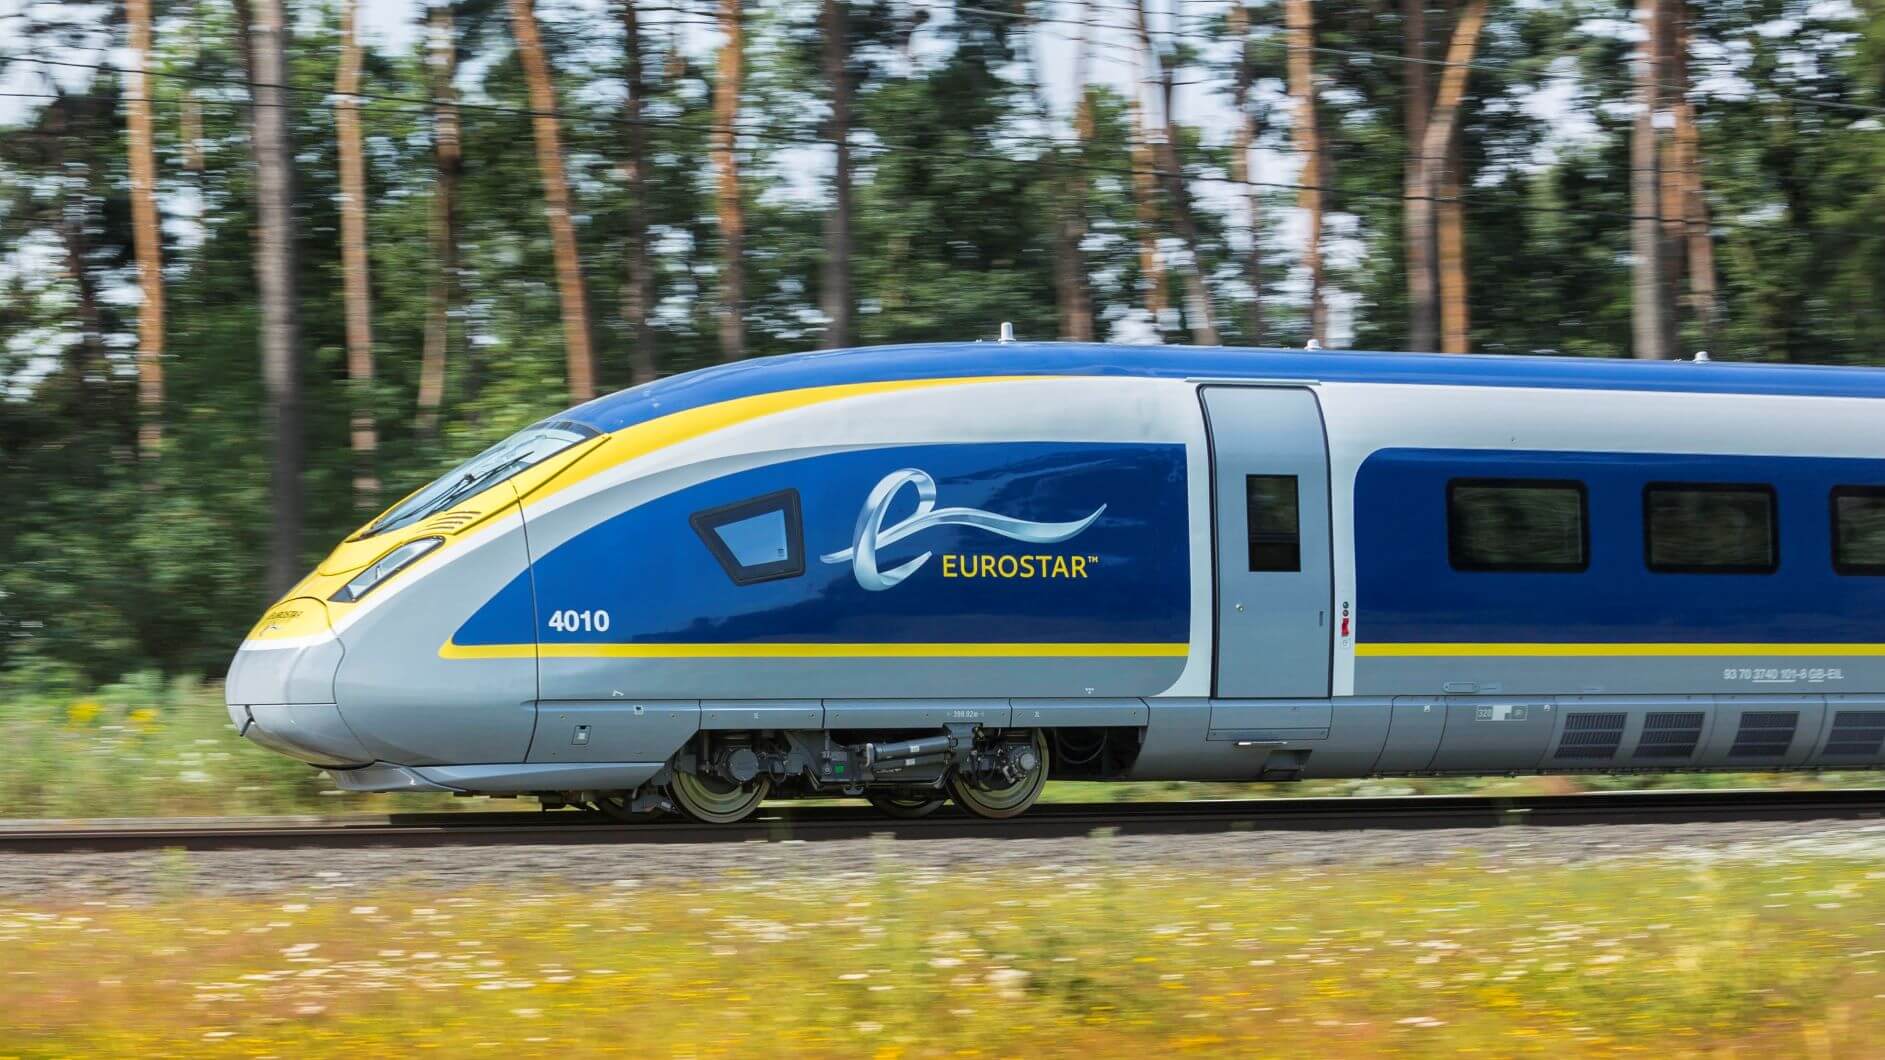 Eurostar To Launch Direct Amsterdam To London Trains In ...